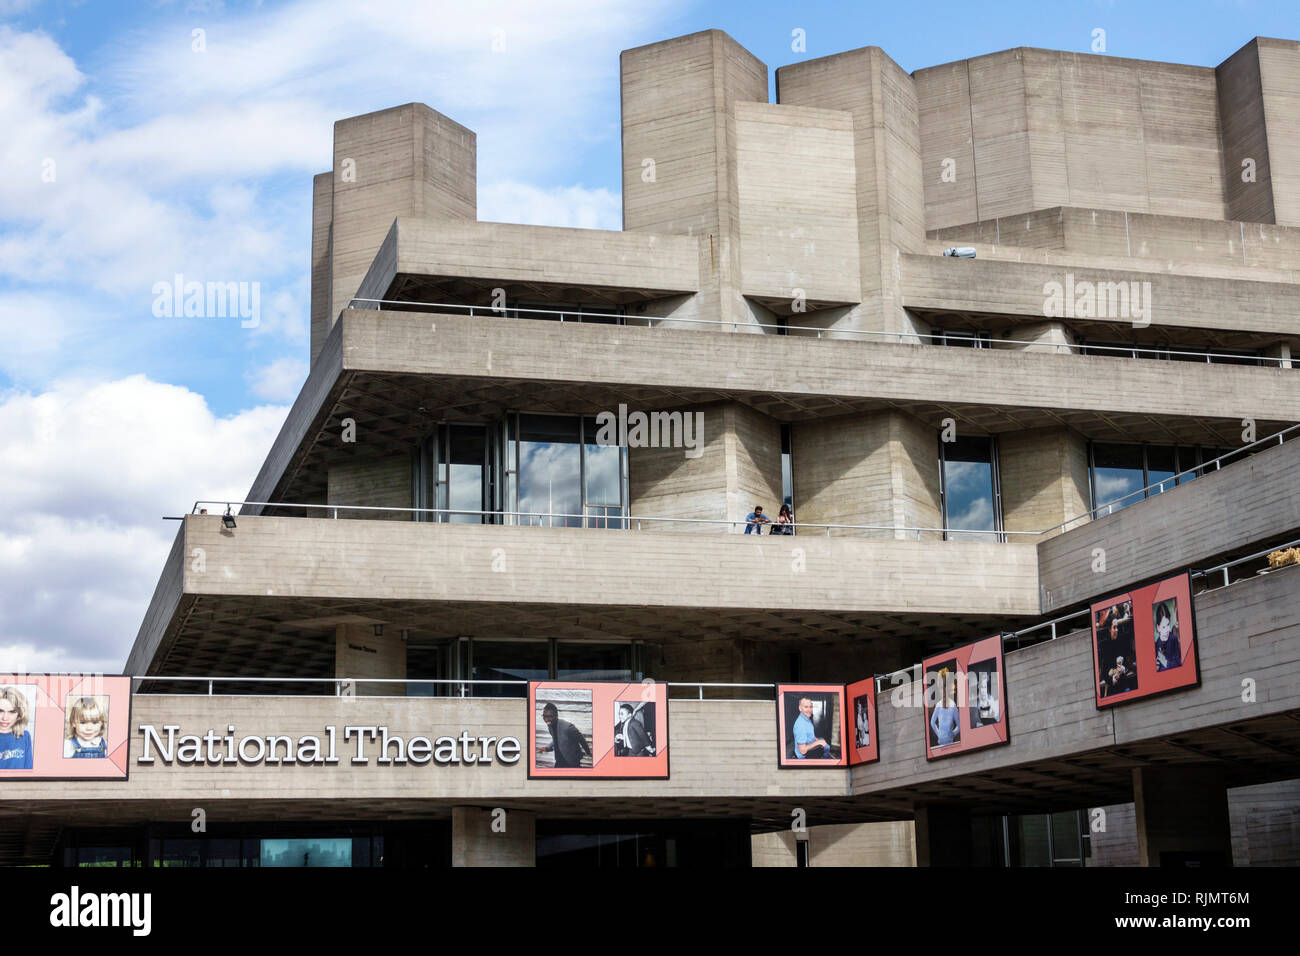 London England United Kingdom Great Britain Lambeth South Bank Royal National Theatre theater building exterior brutalist architecture by Deny Stock Photo